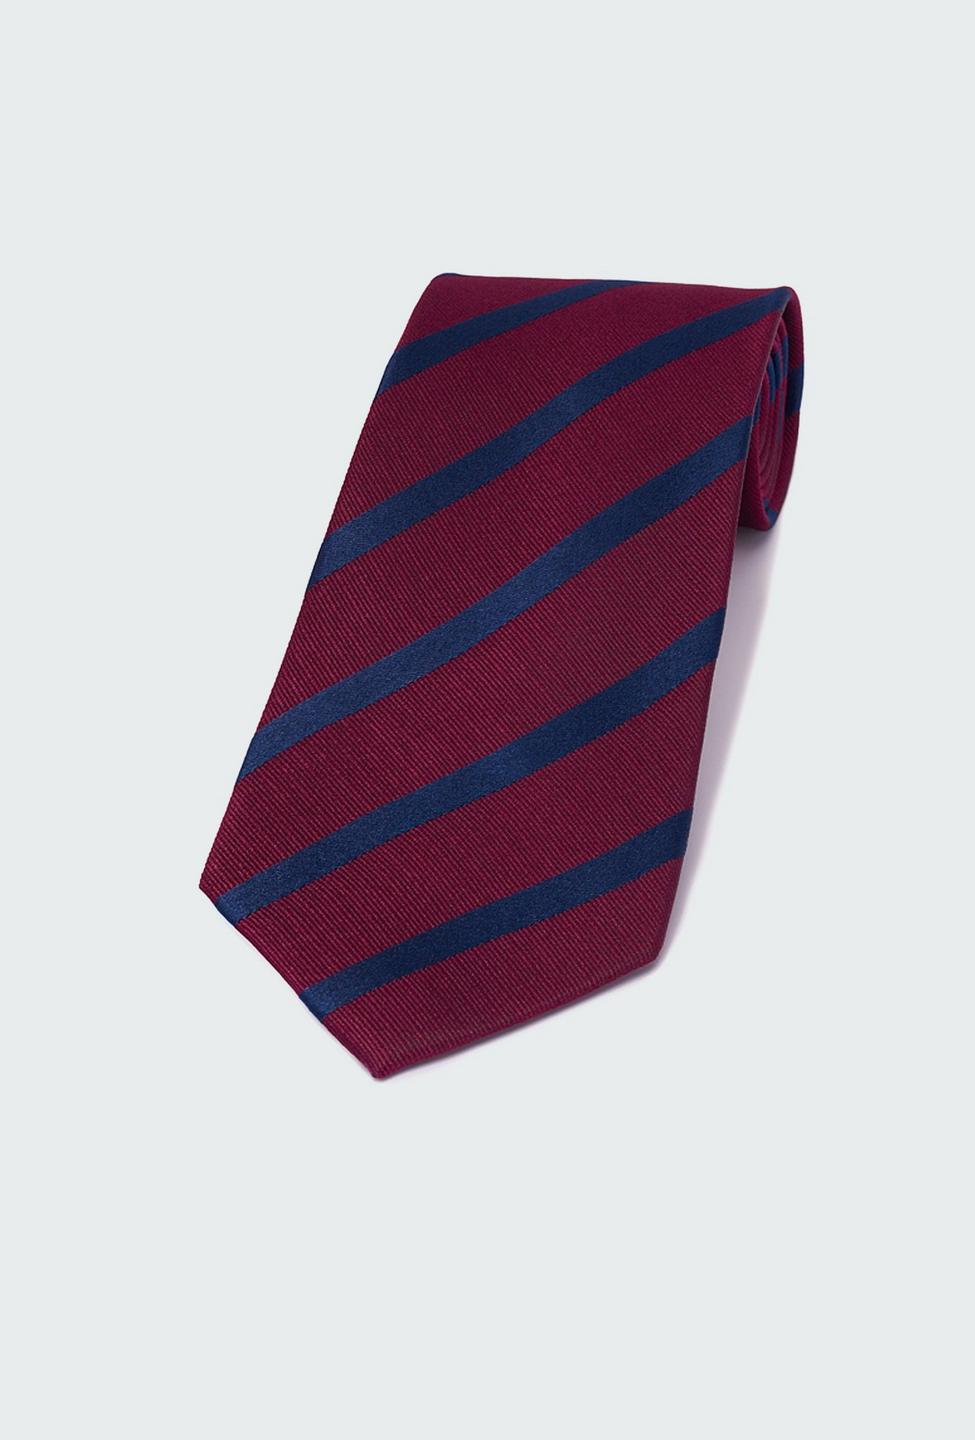 Burgundy tie - Striped Design from Indochino Collection